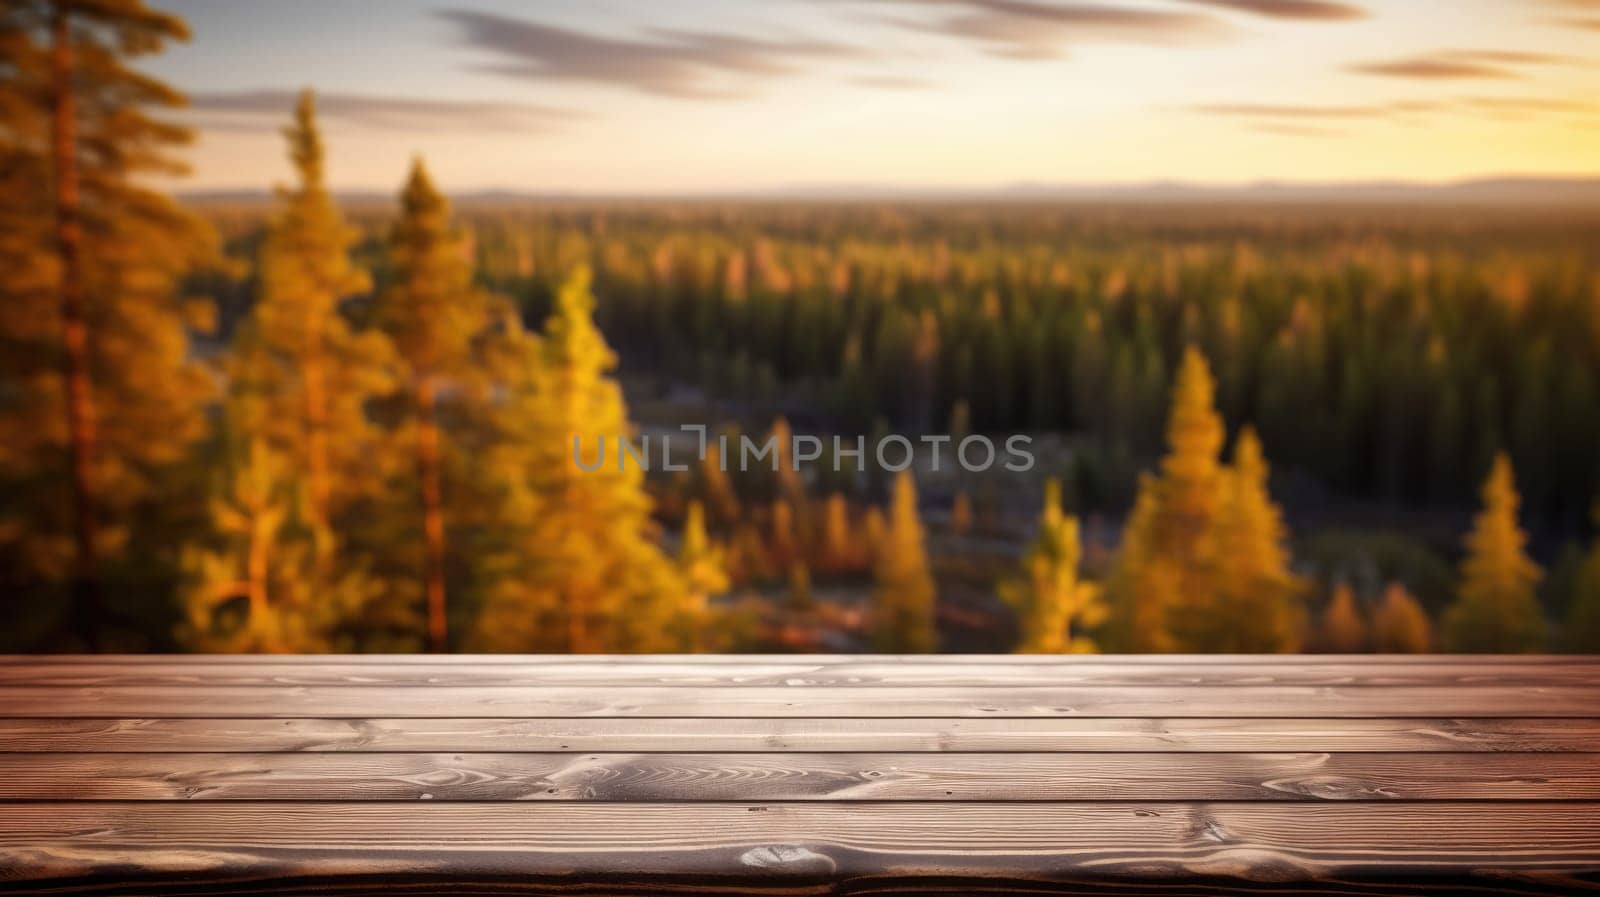 The empty wooden brown table top with blur background of Finland nature. Exuberant image.